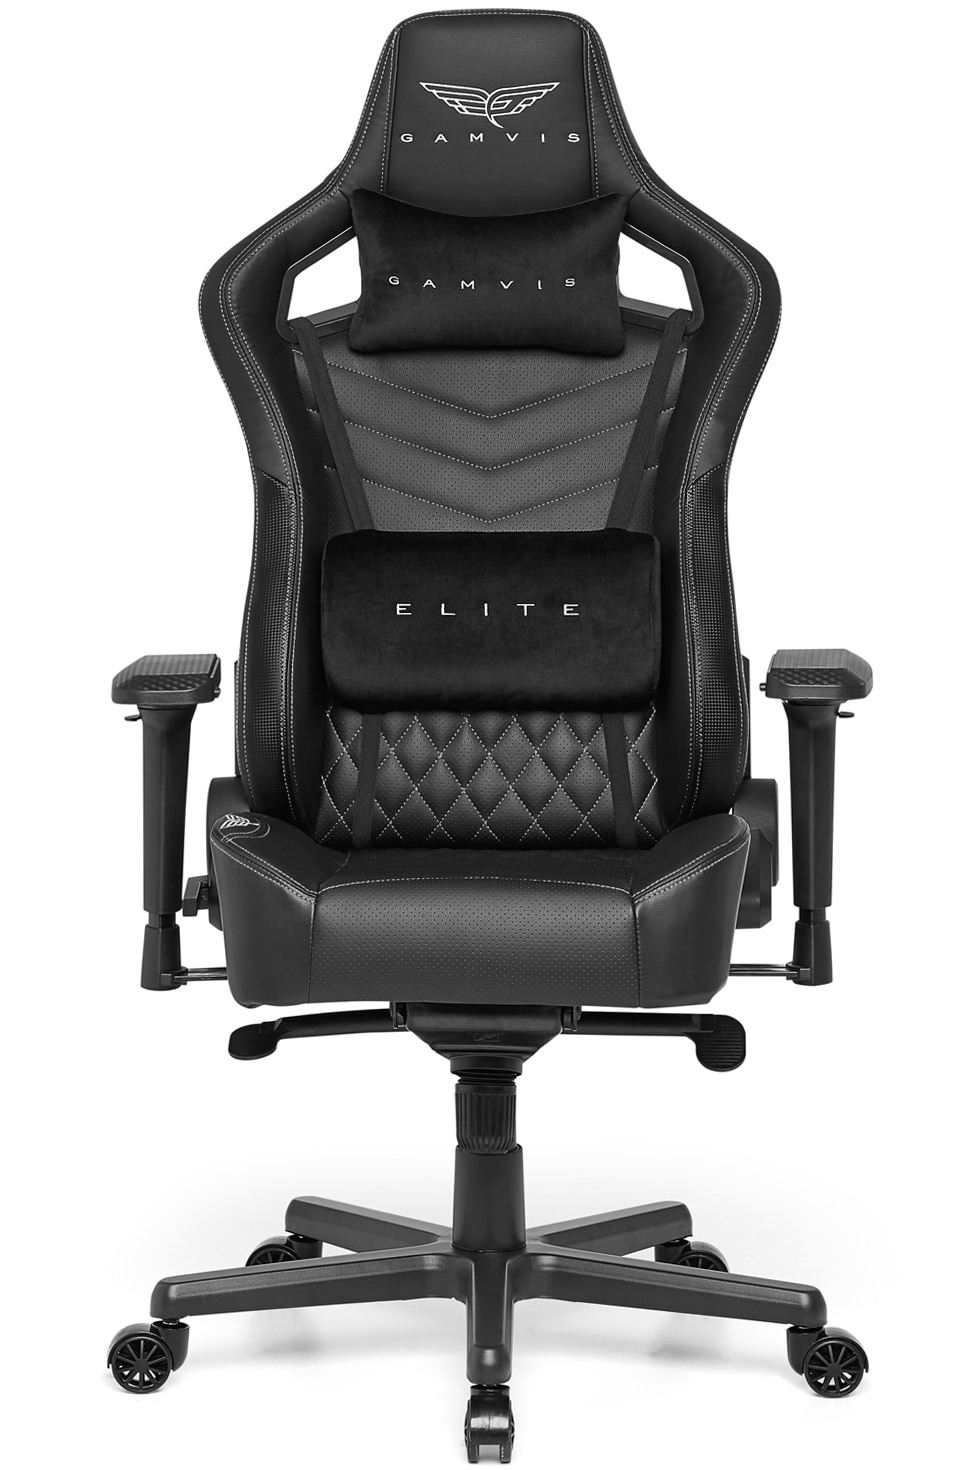 Gamvis ELITE 2.0 XL Quilted Gaming Chair – Black/Diamond White